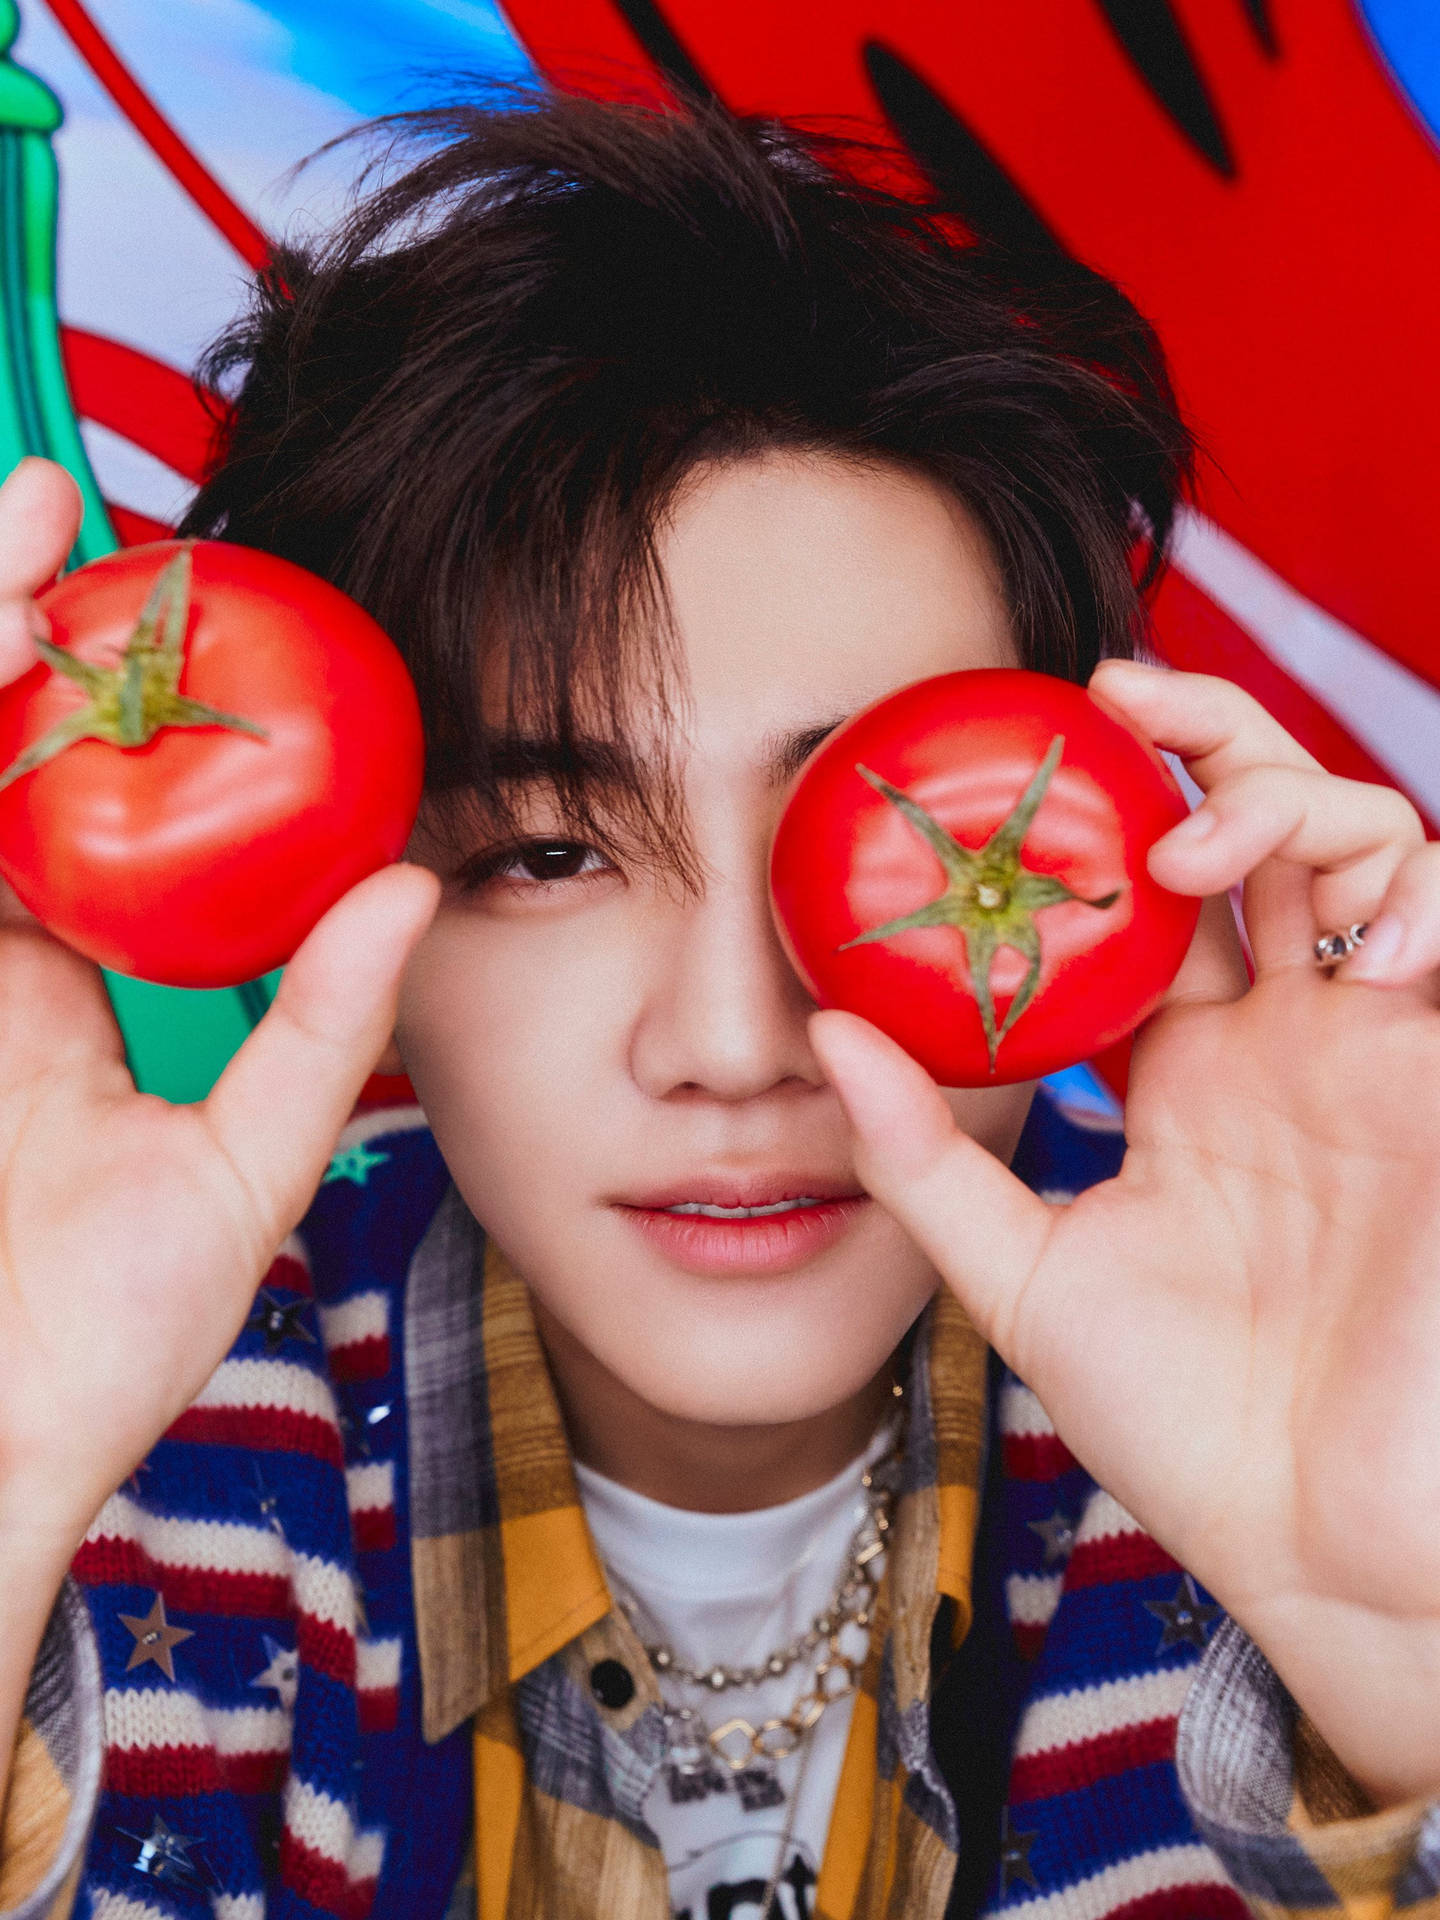 Jaemin Nct With Tomatoes